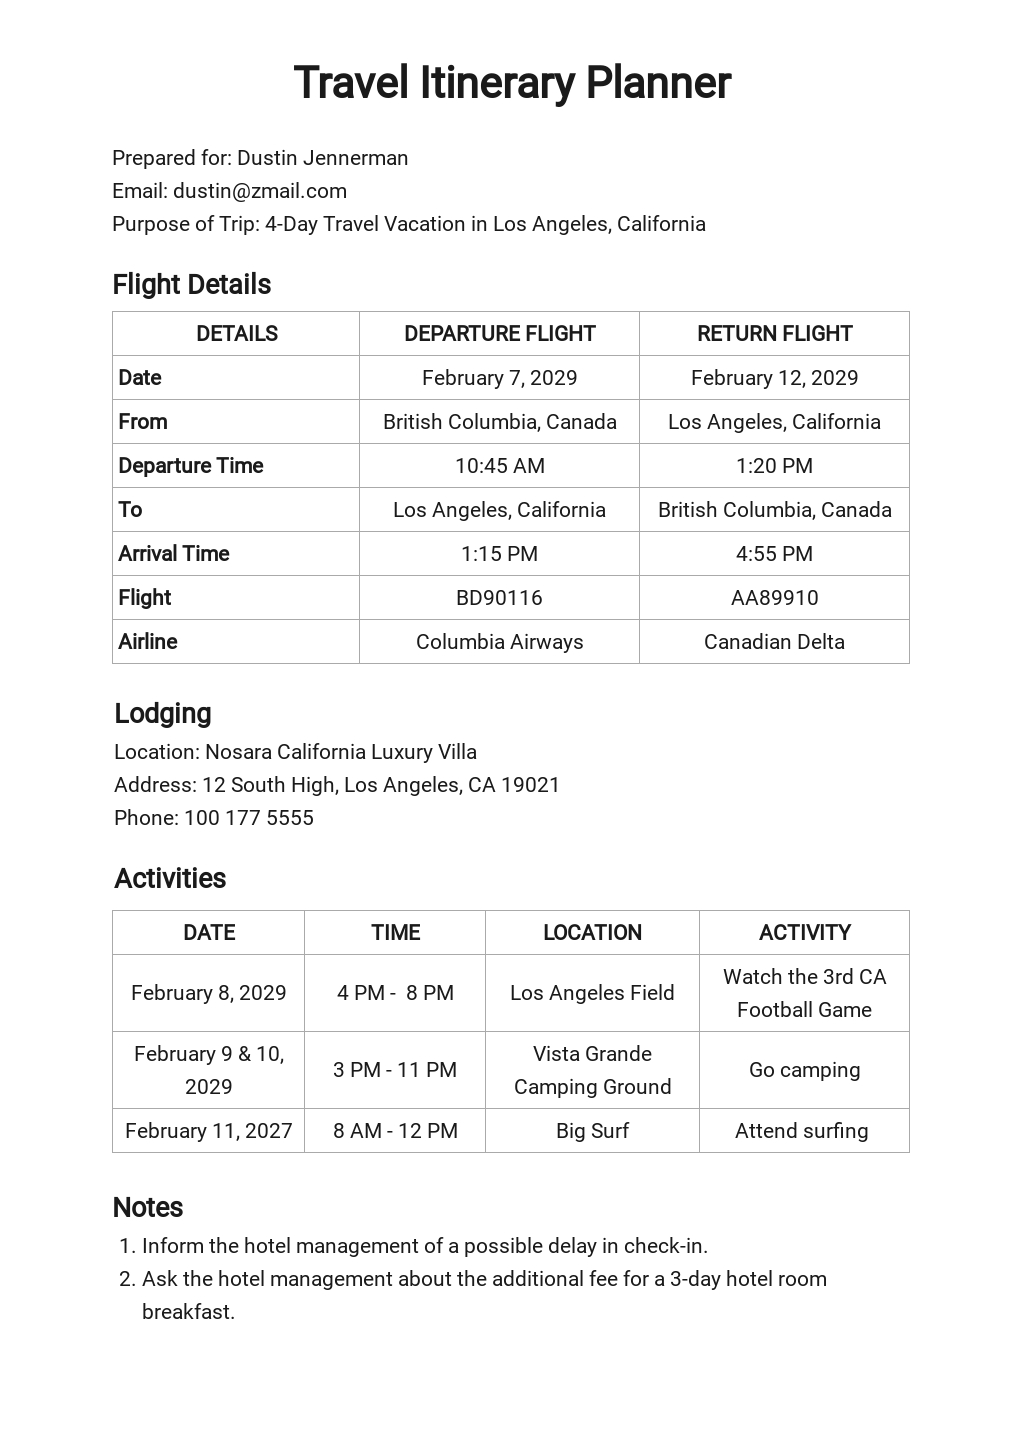 Travel Itinerary Planner Template.jpe